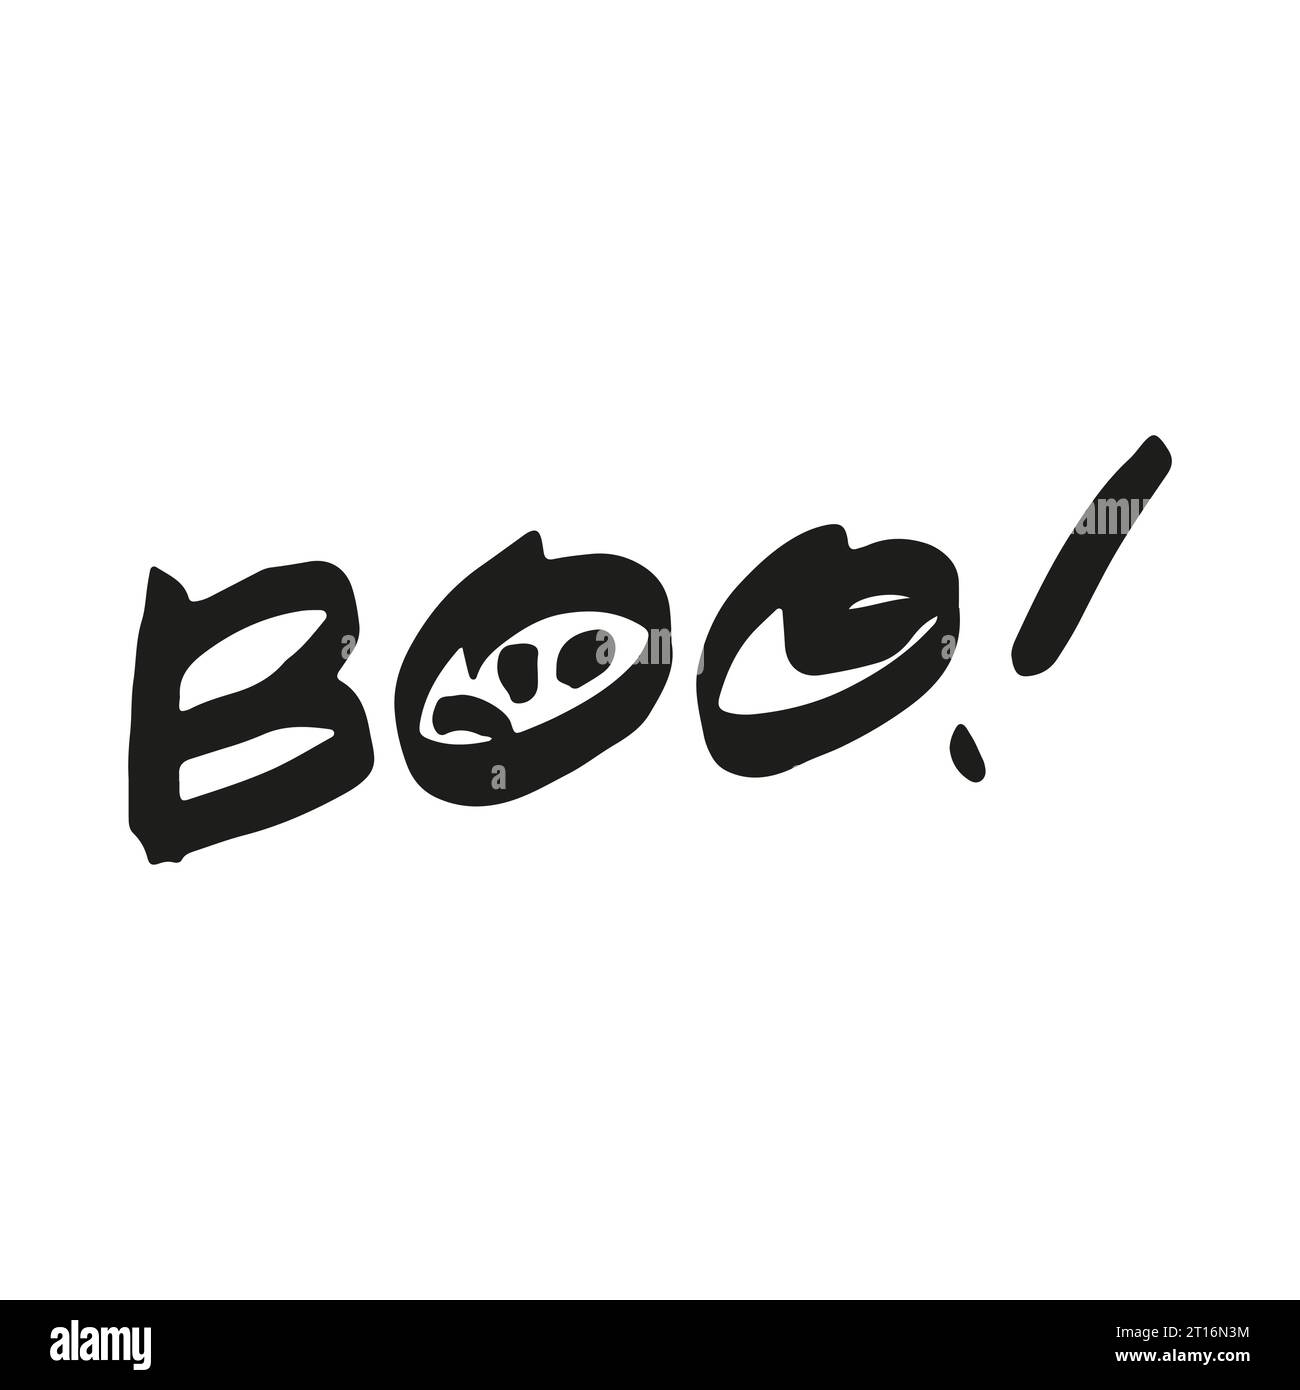 Slogan Halloween is a boo street style. Eyes and mouth in the letter. Hand drawn wall art graffiti. Halloween party. Design of postcards, flyers. Vector illustration. Stock Vector